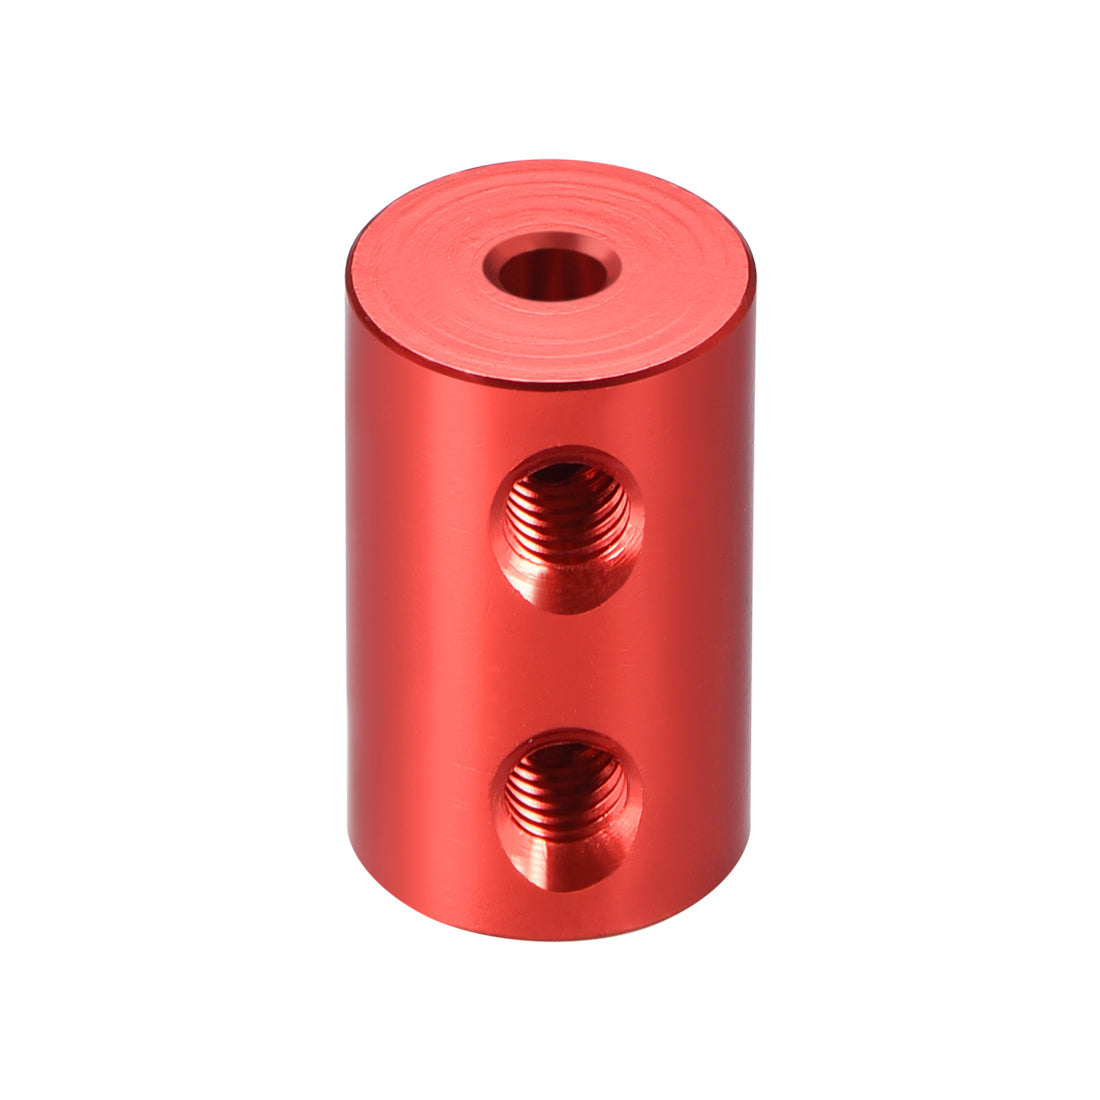 uxcell Uxcell Shaft Coupling 3mm to 4mm Bore L20xD12 Robot Motor Wheel Rigid Coupler Red